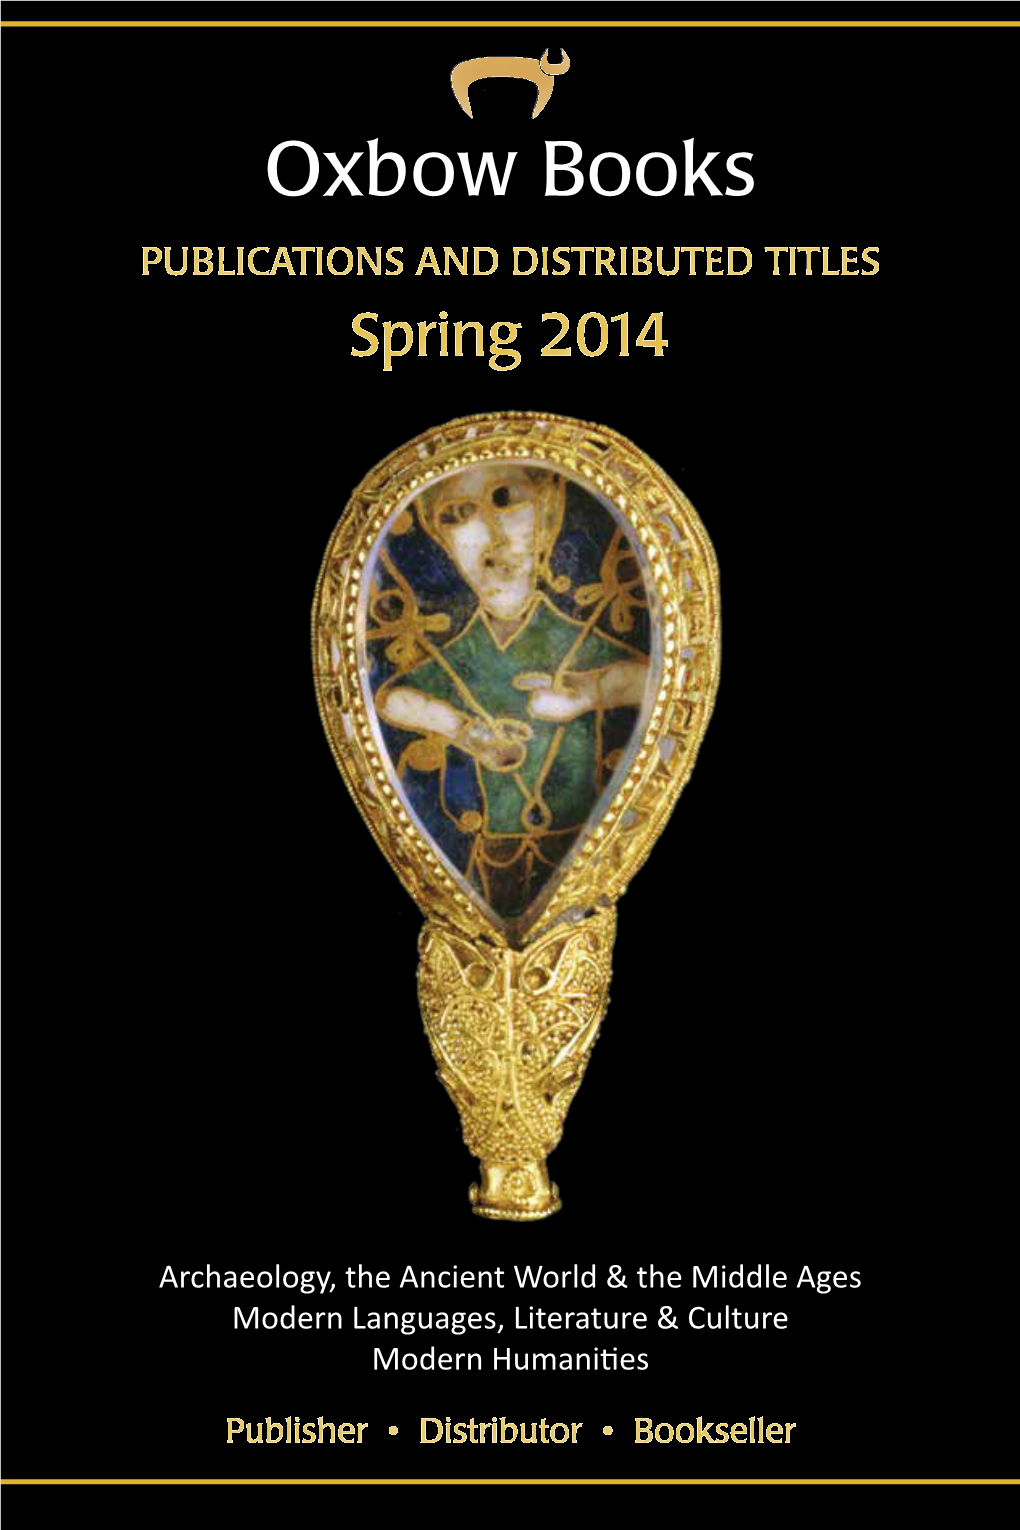 Oxbow Books PUBLICATIONS and DISTRIBUTED TITLES Spring 2014